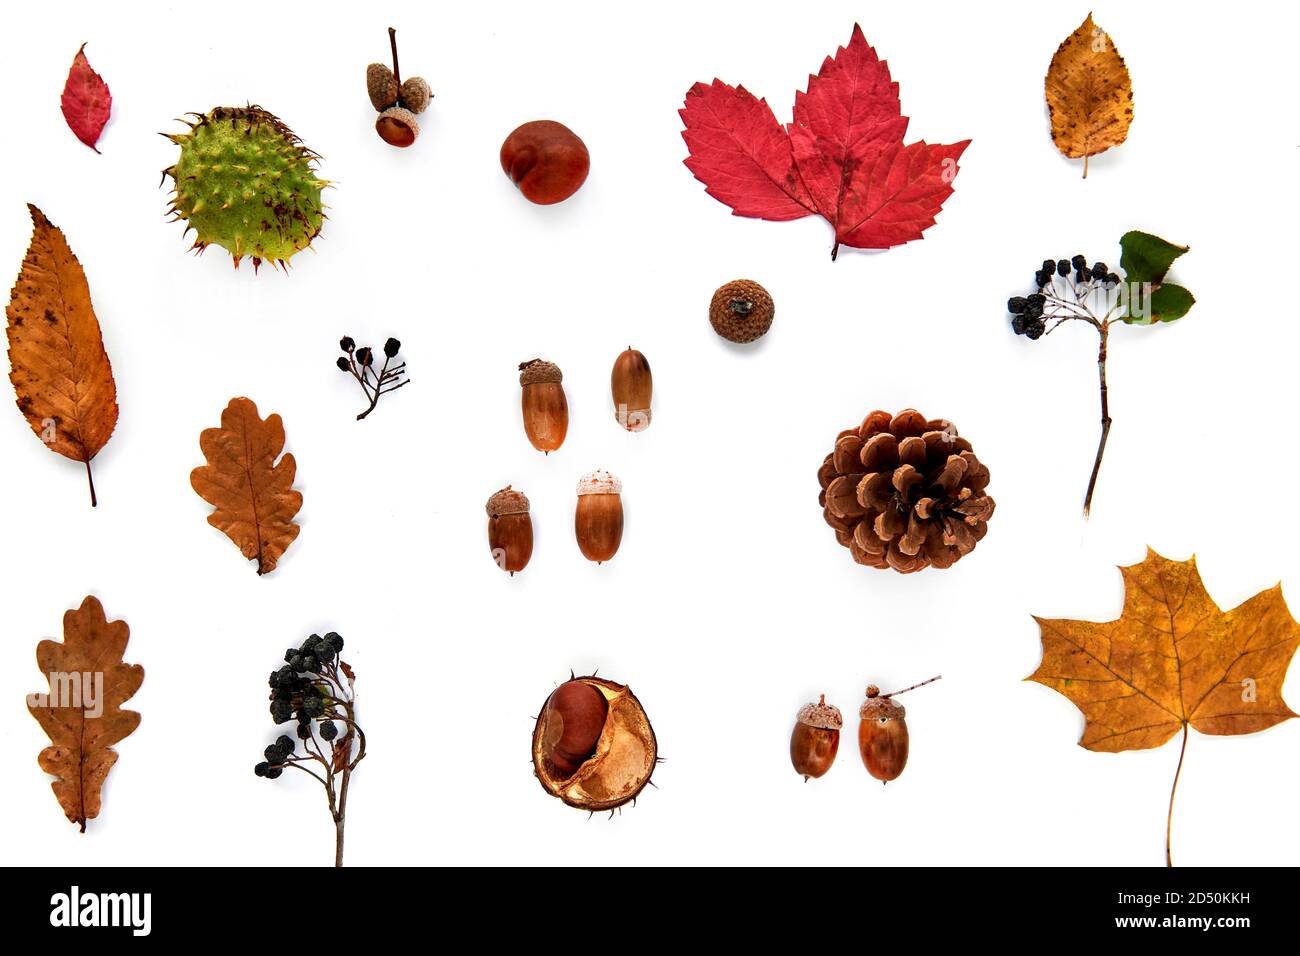 Autumn composition. Pattern made of dried leaves, branches, pine cones, berries, chestnuts and acorns isolated on white background. Template mockup Stock Photo